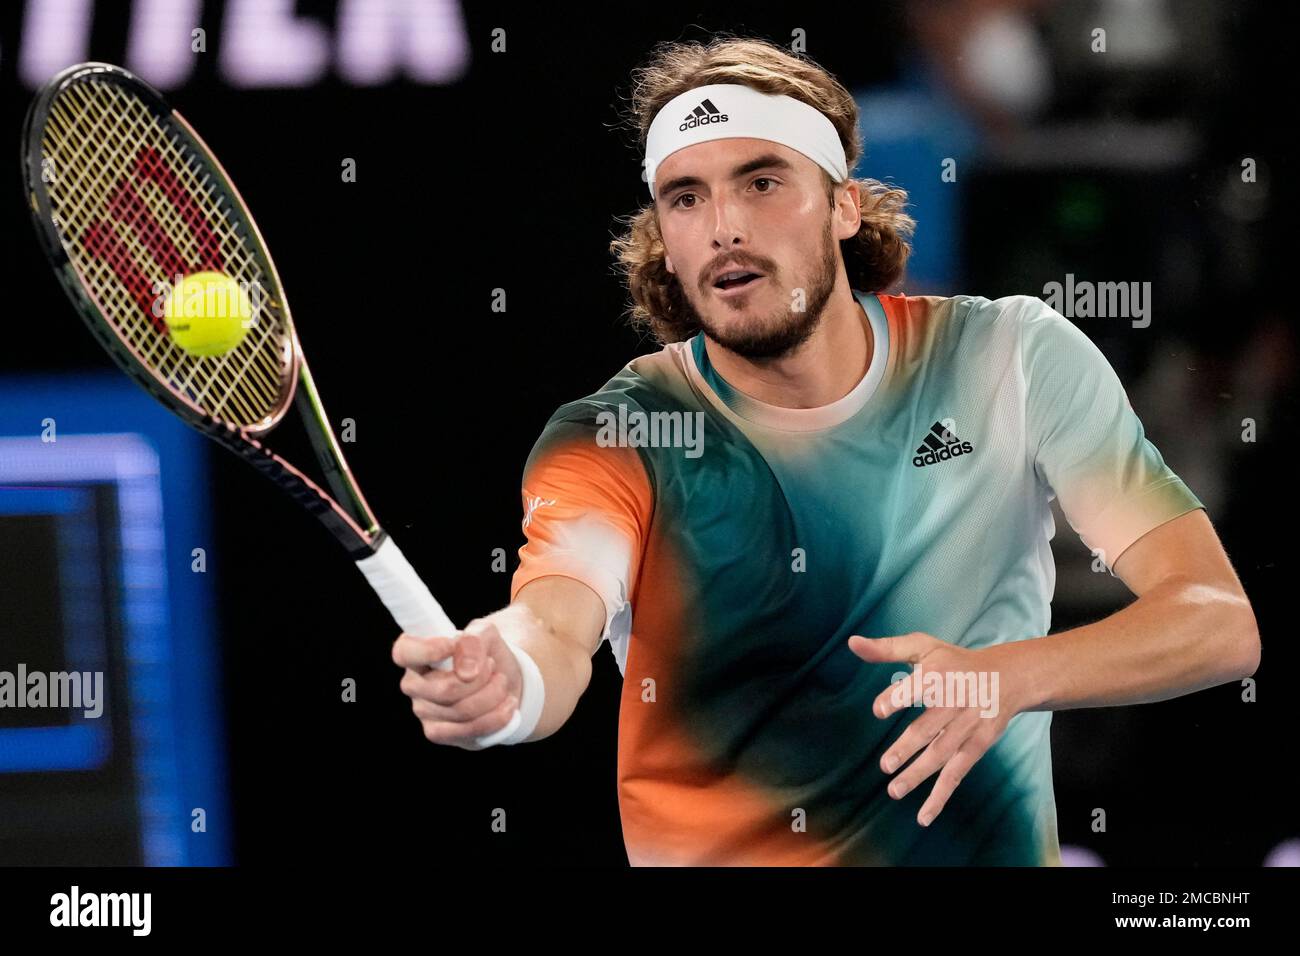 Stefanos Tsitsipas of Greece plays a forehand return to Daniil Medvedev of Russia during their semifinal match at the Australian Open tennis championships in Melbourne, Australia, Friday, Jan